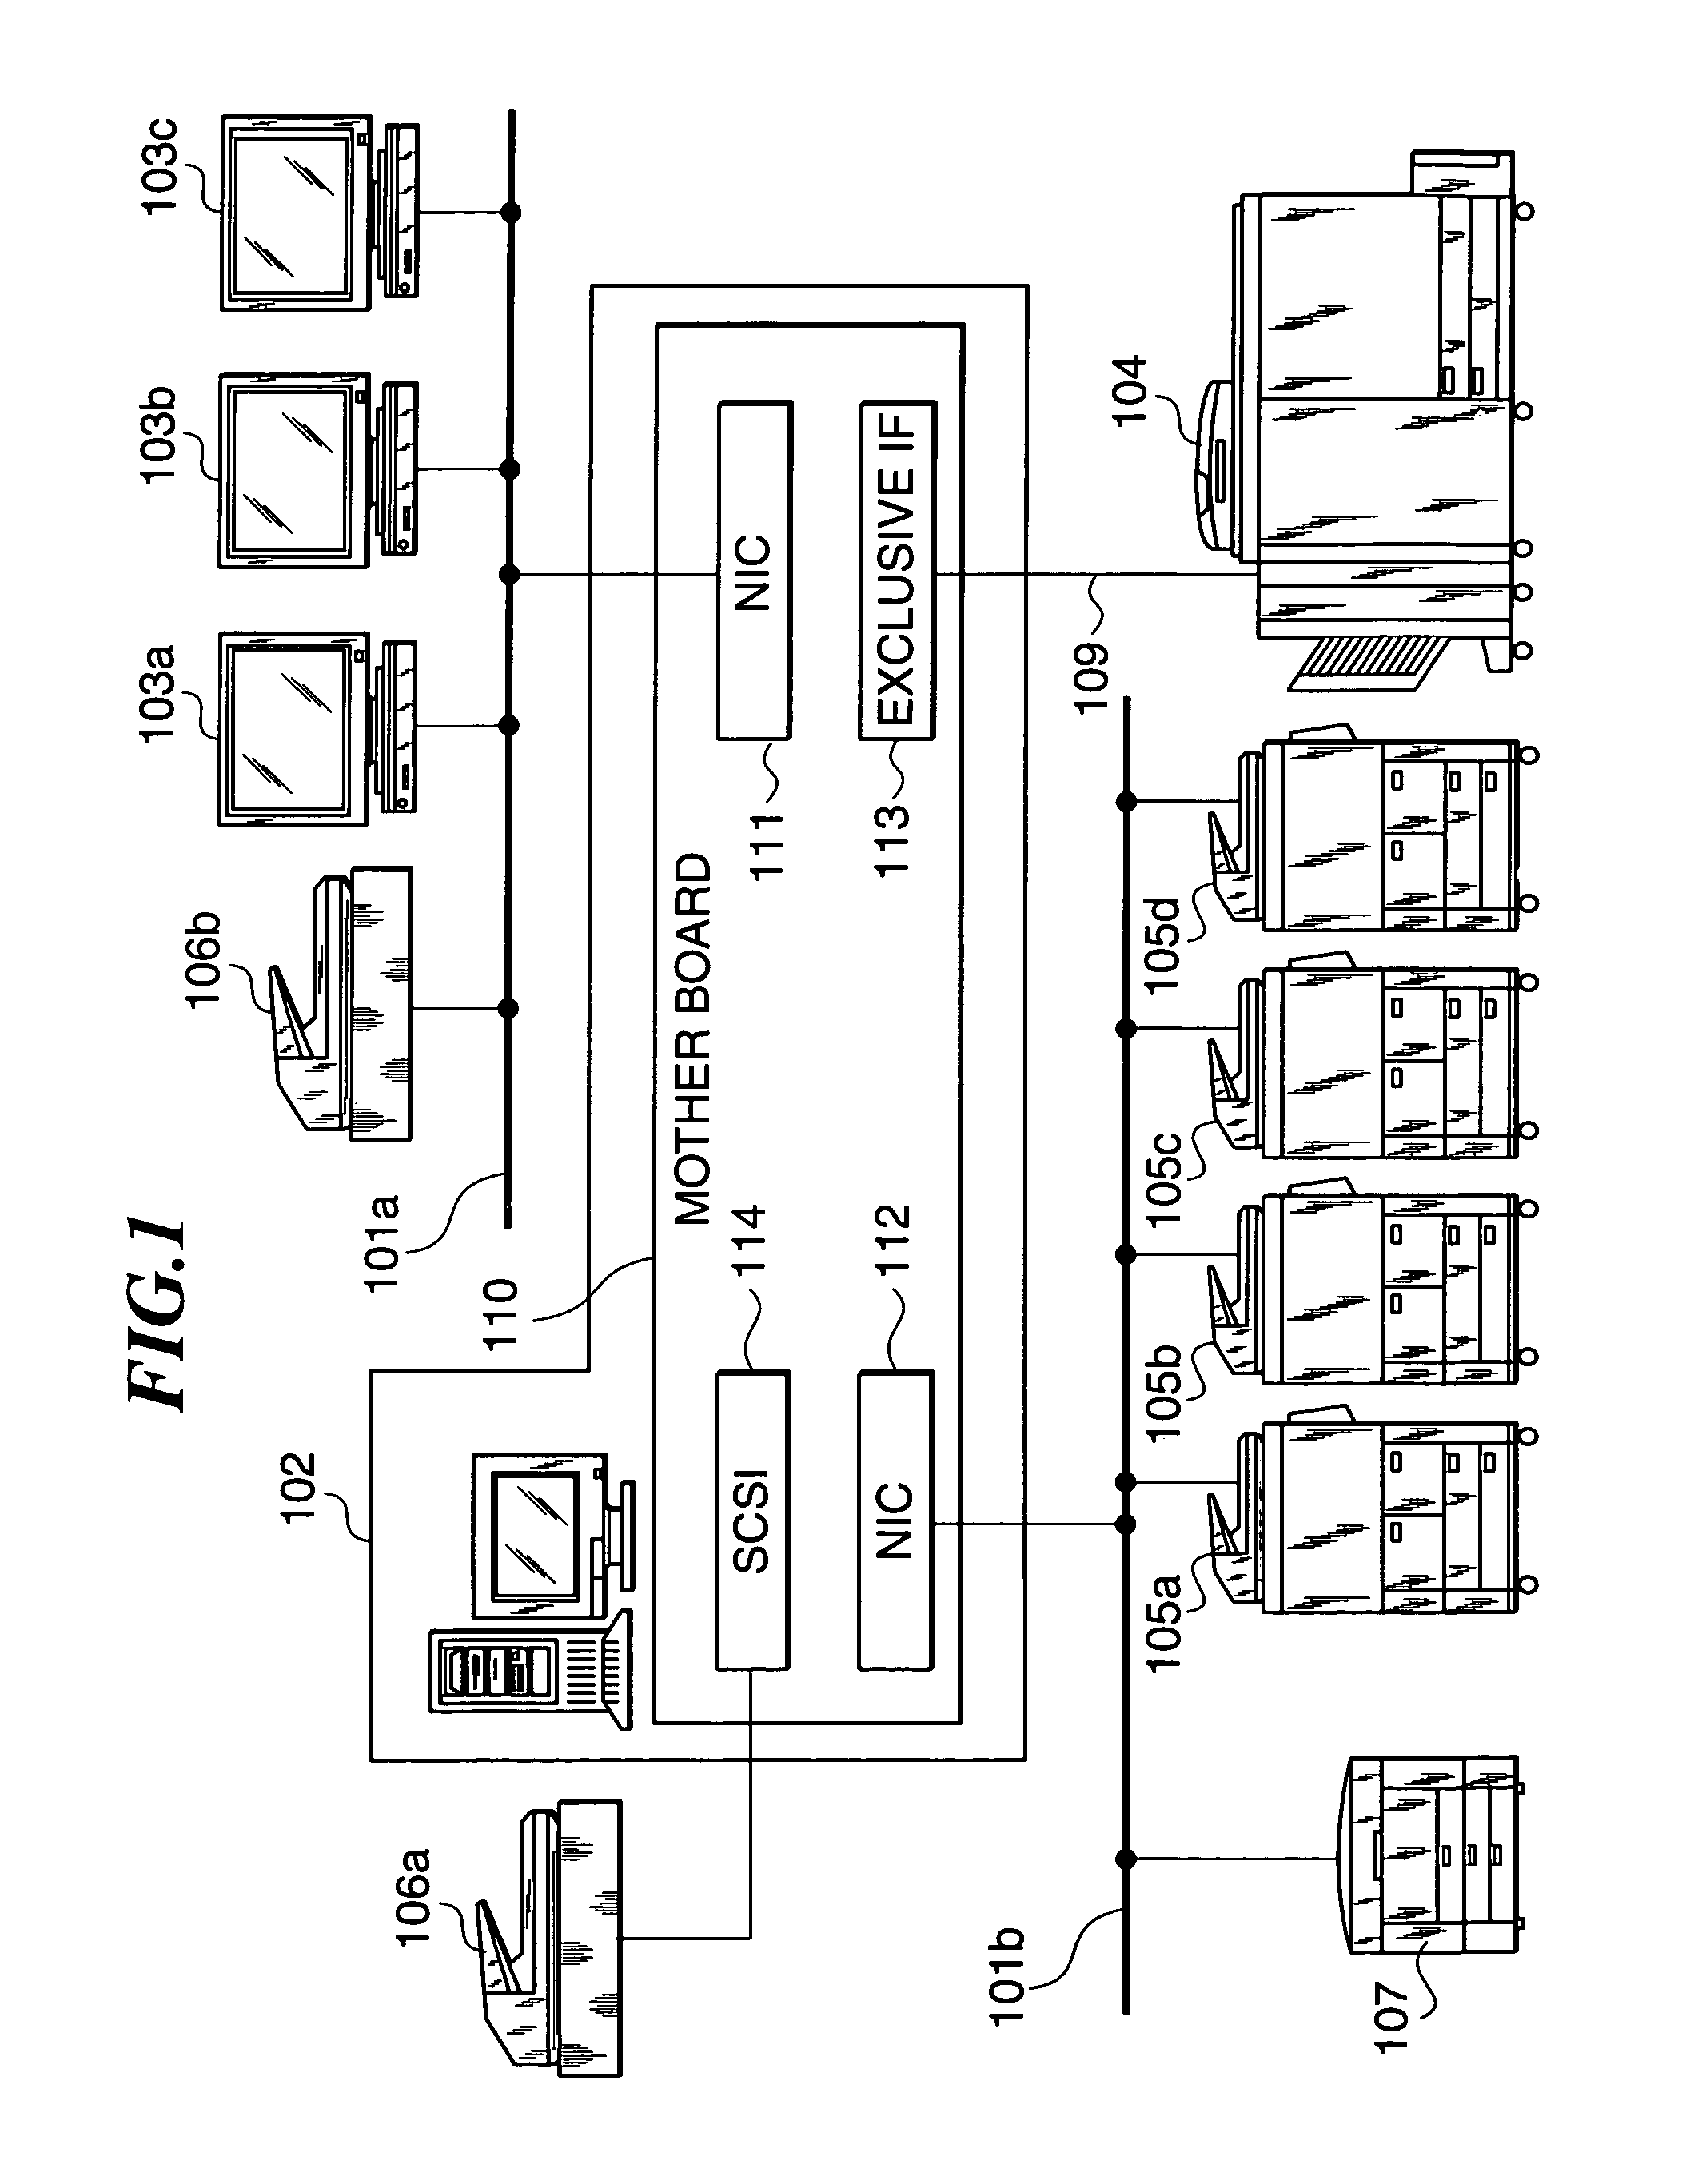 Image processing apparatus and system and control method therefor, image data processing method, image forming apparatus and control method therefor, controller therefor, and storage medium storing the control method for processing image data having different printing attributes